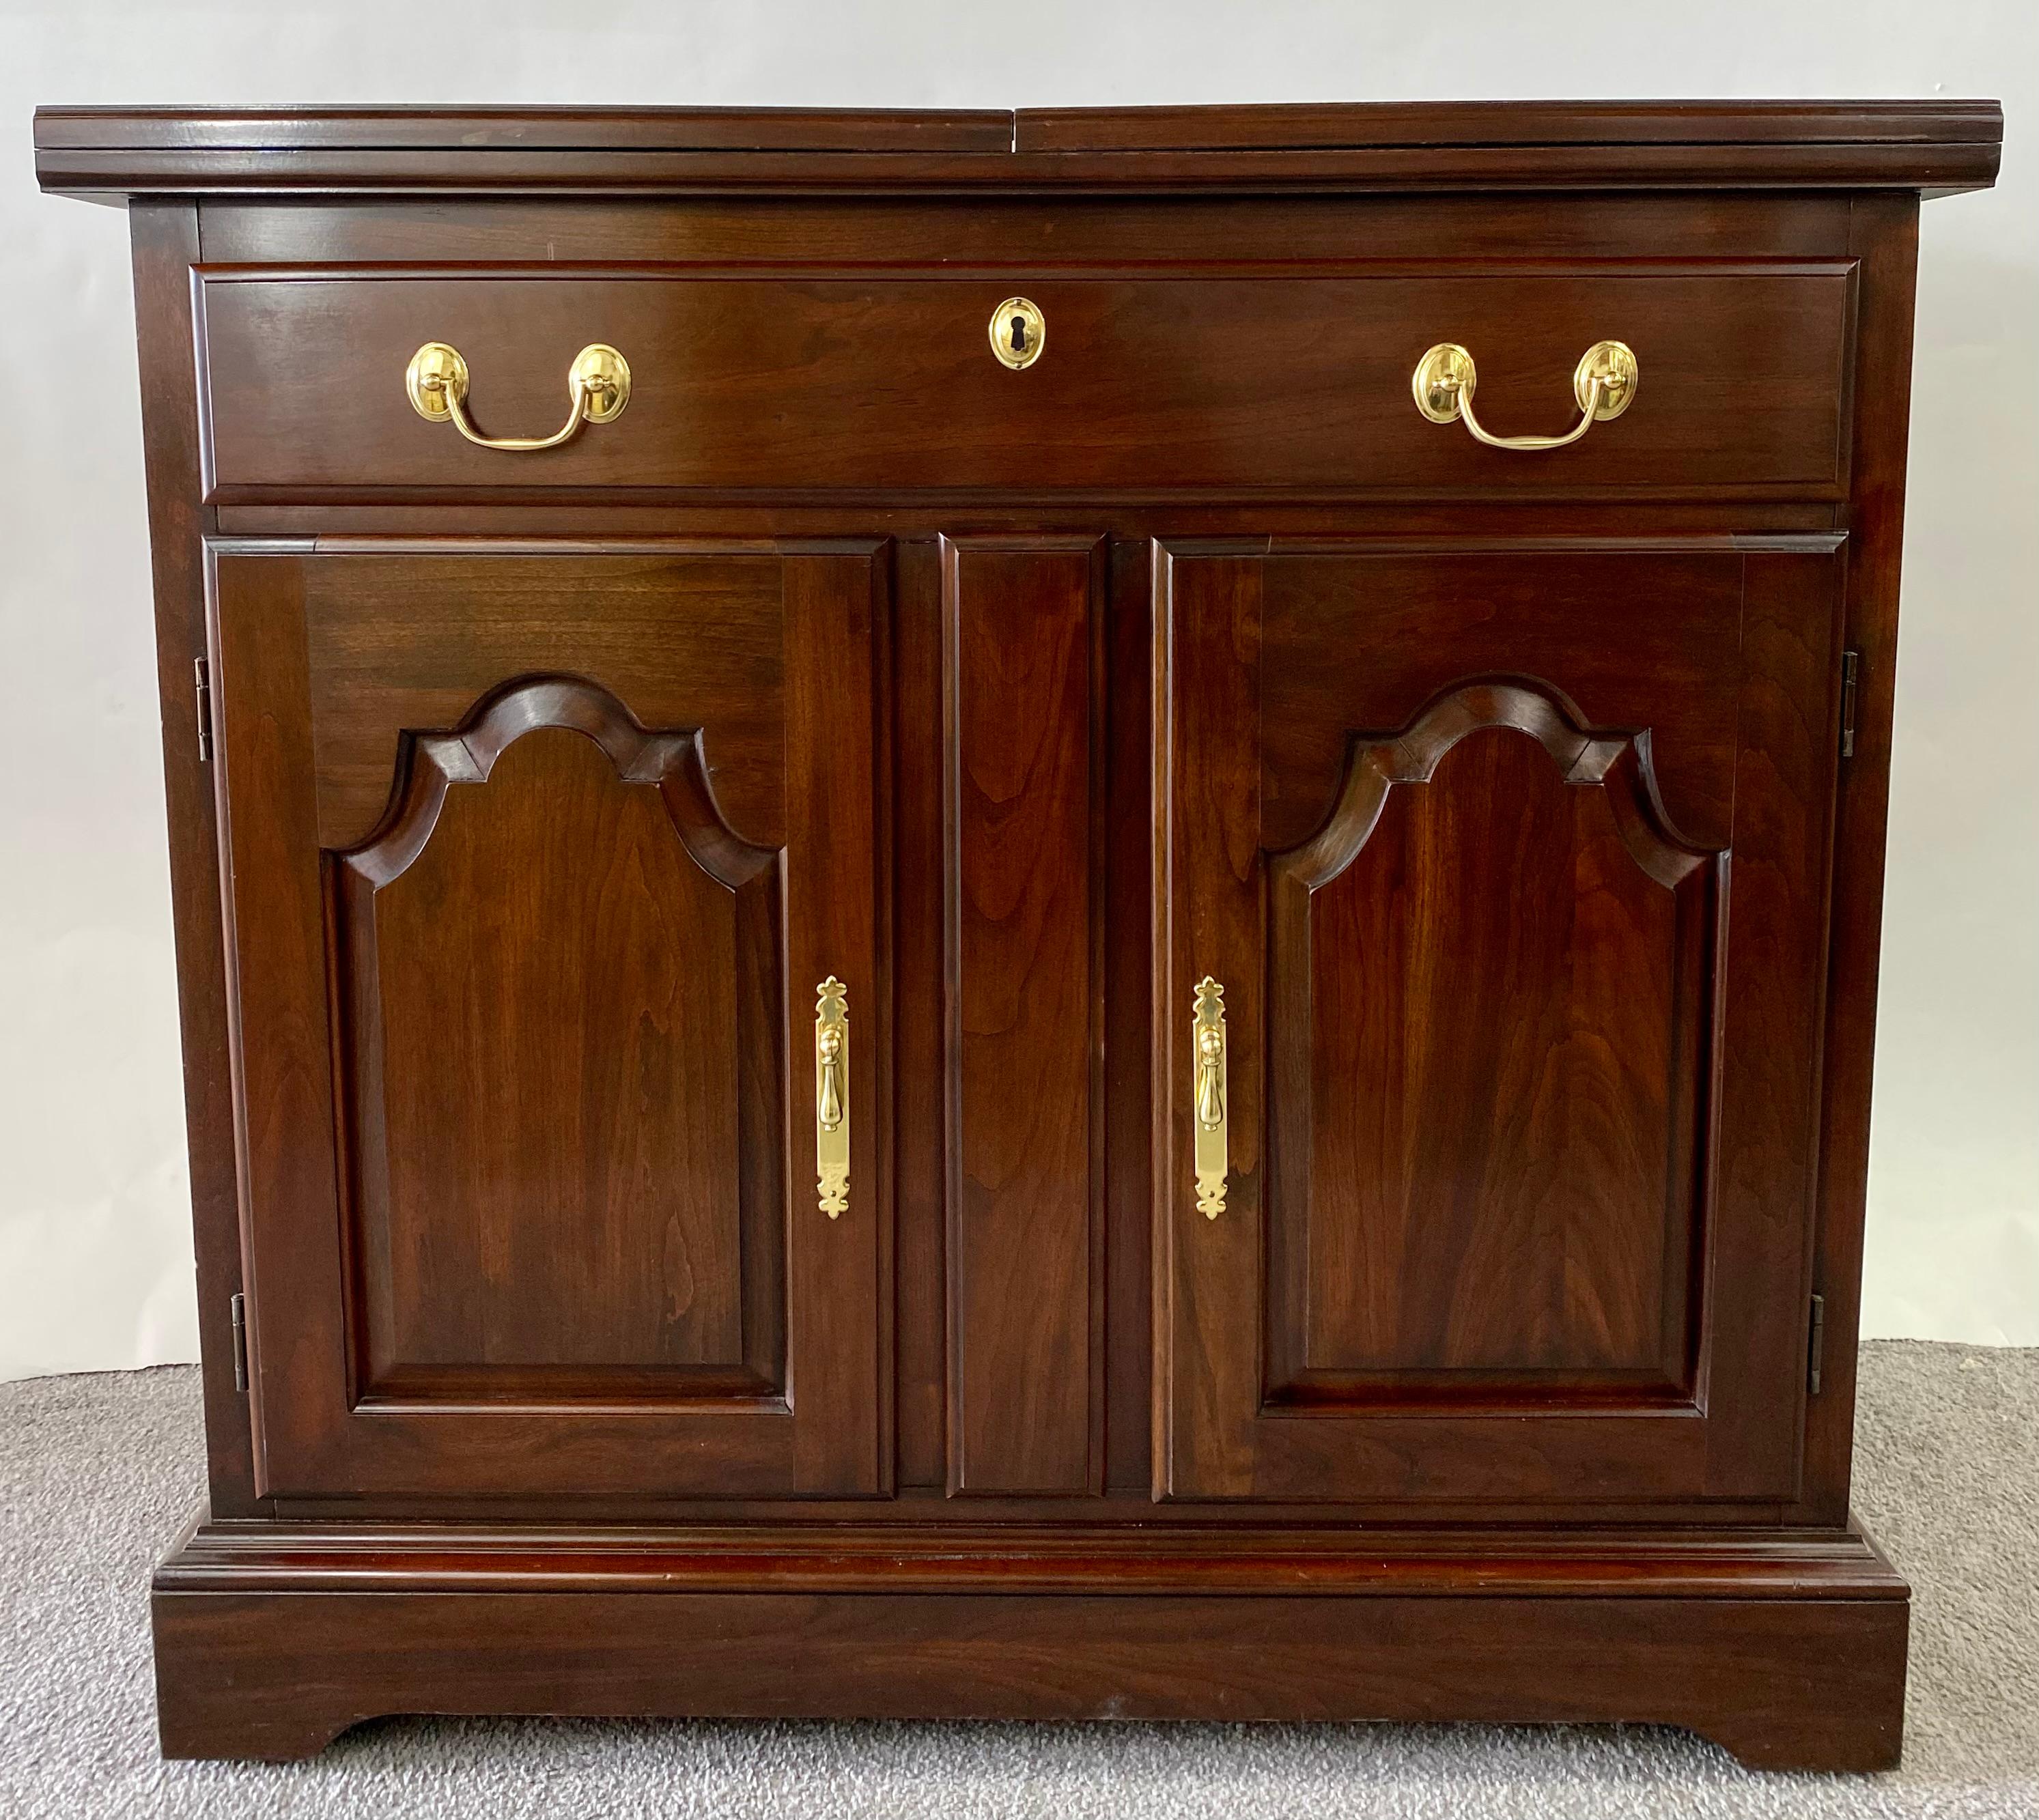 A quality solid Cherry wood cabinet or serving bar by Harden furniture. The cabinet features a single drawer over door cabinet. Each cabinet has one shelf. The top of the cabinet painted in black unfolds from both sides to offer more space for